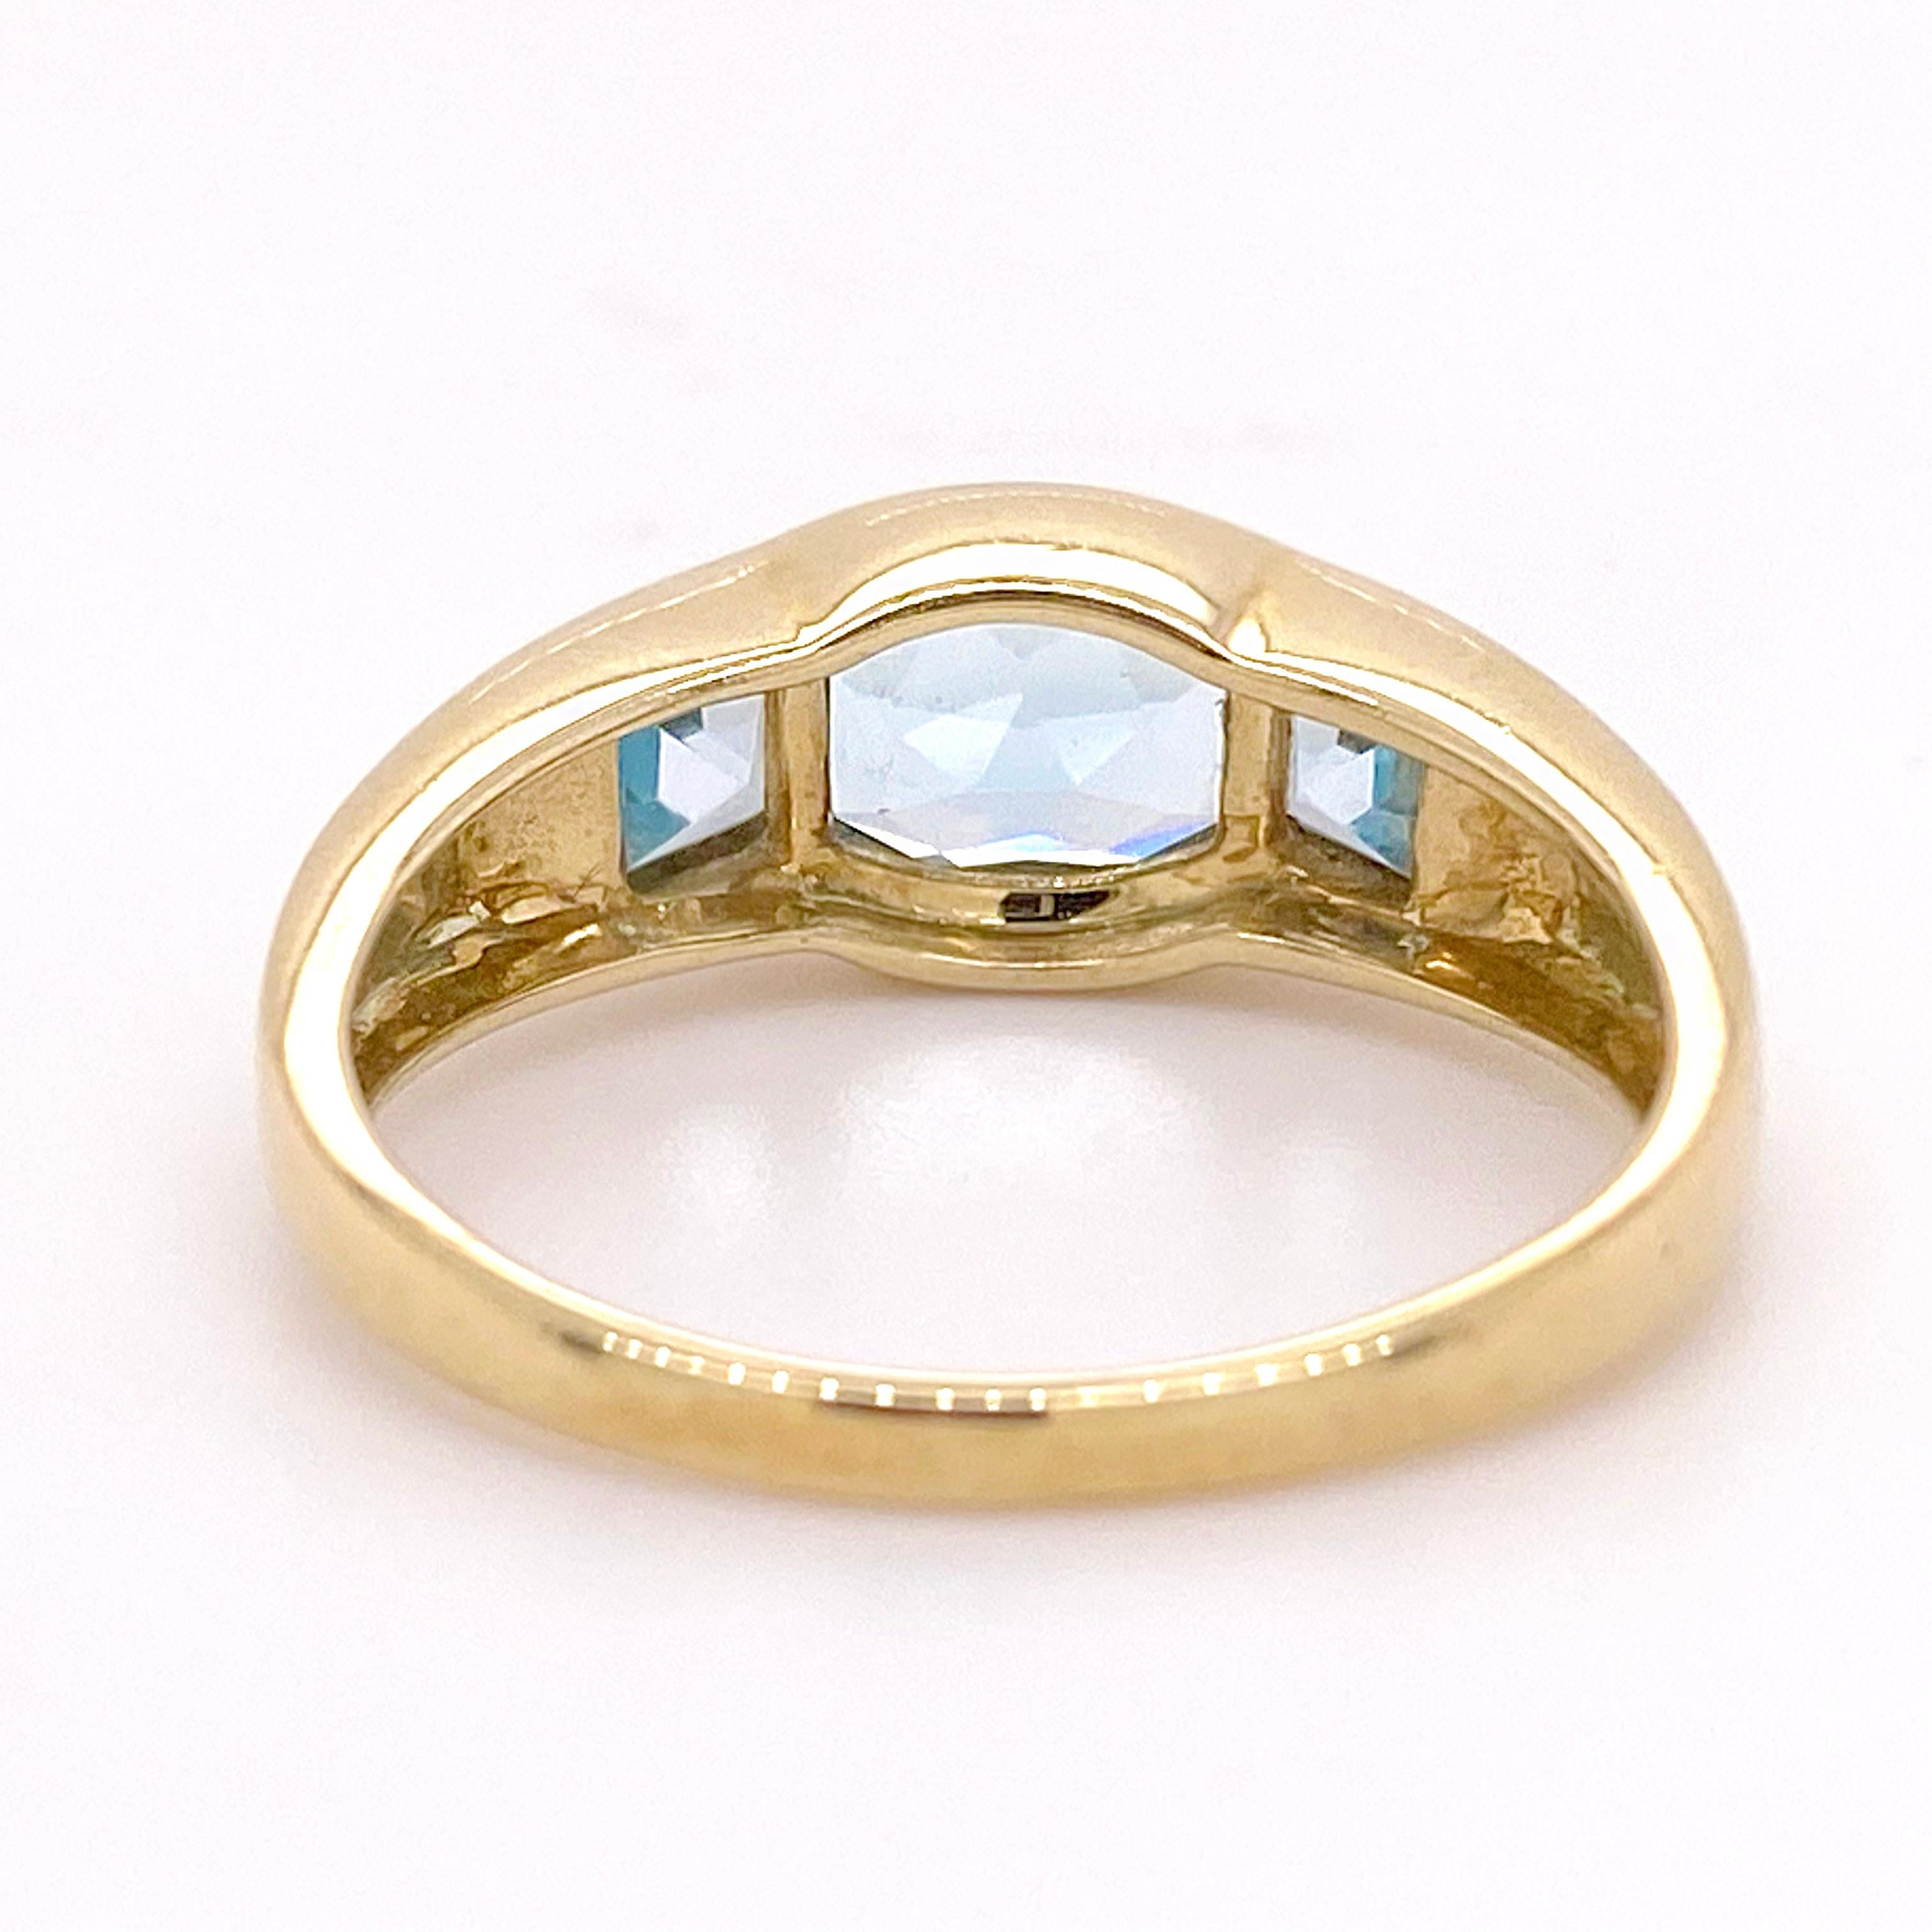 Contemporary Blue Topaz Band Ring, 3 Stone Ring, Fancy Cut Genuine Blue Topaz in Yellow Gold